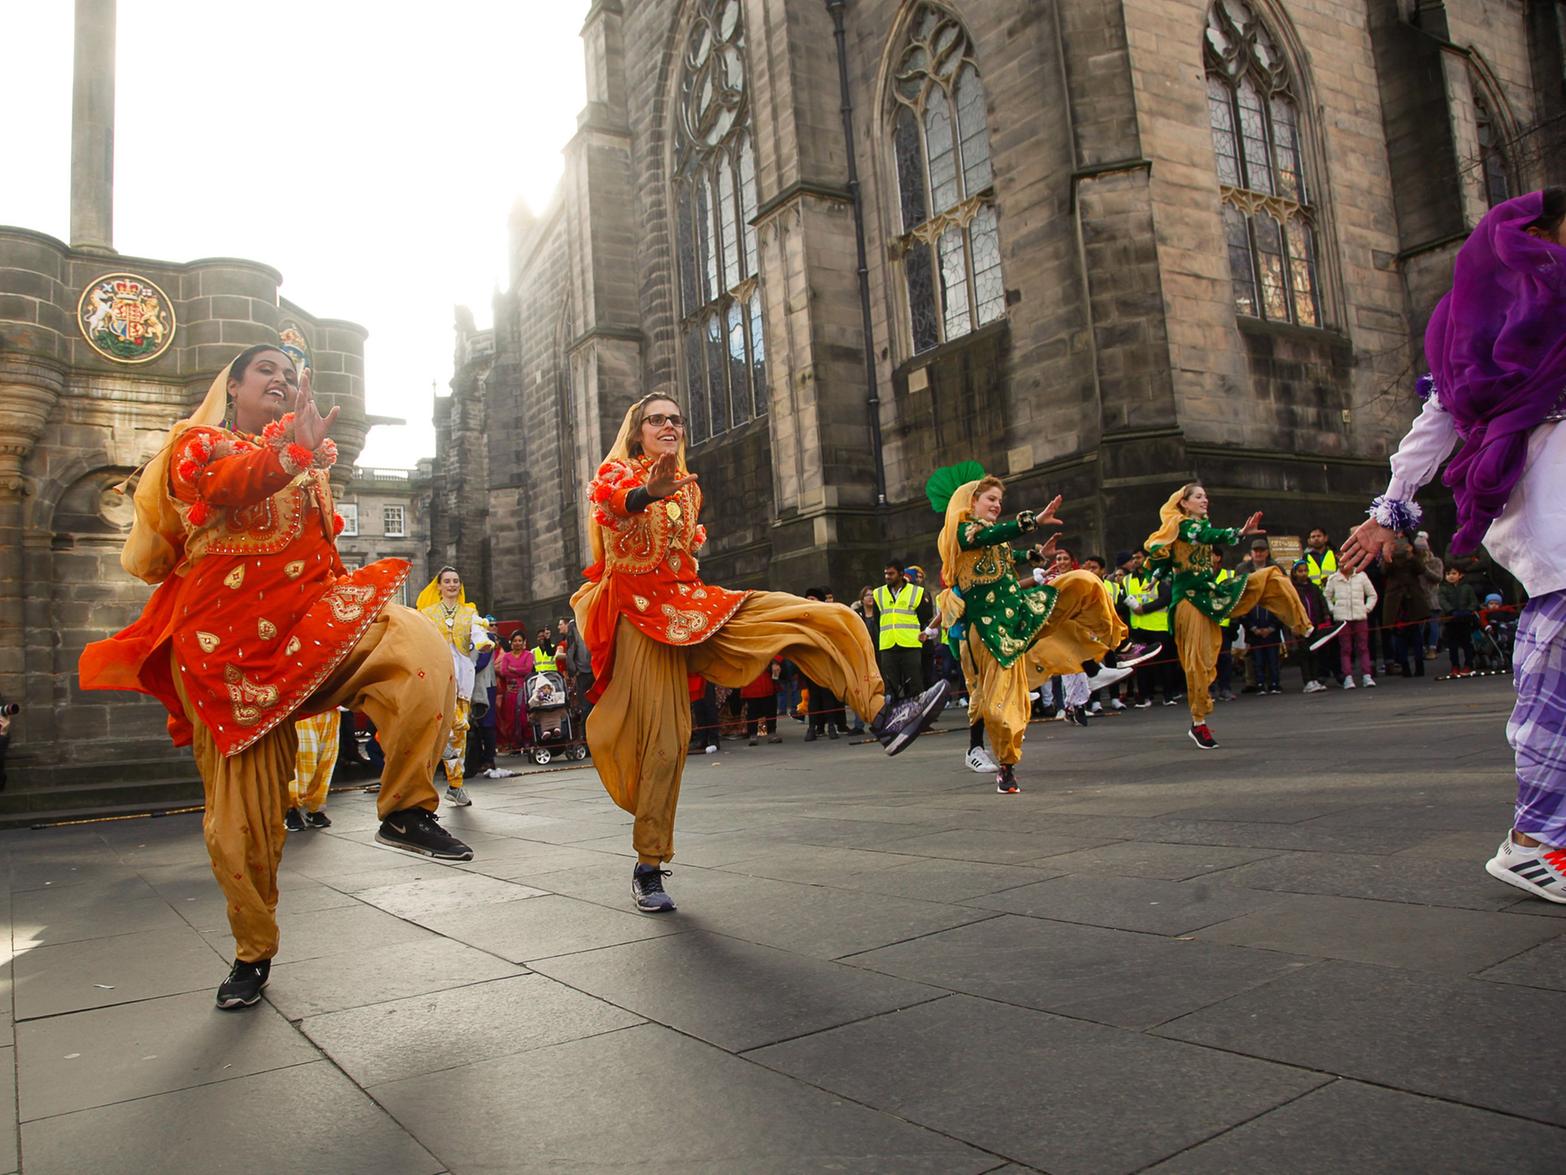 Several shows entertained crowds at the City Chambers before the parade set off, including performances by Bhartiya Ashram, Edinburgh Dandiya and the Edinburgh Bhangra Crew. Picture: Scott Louden